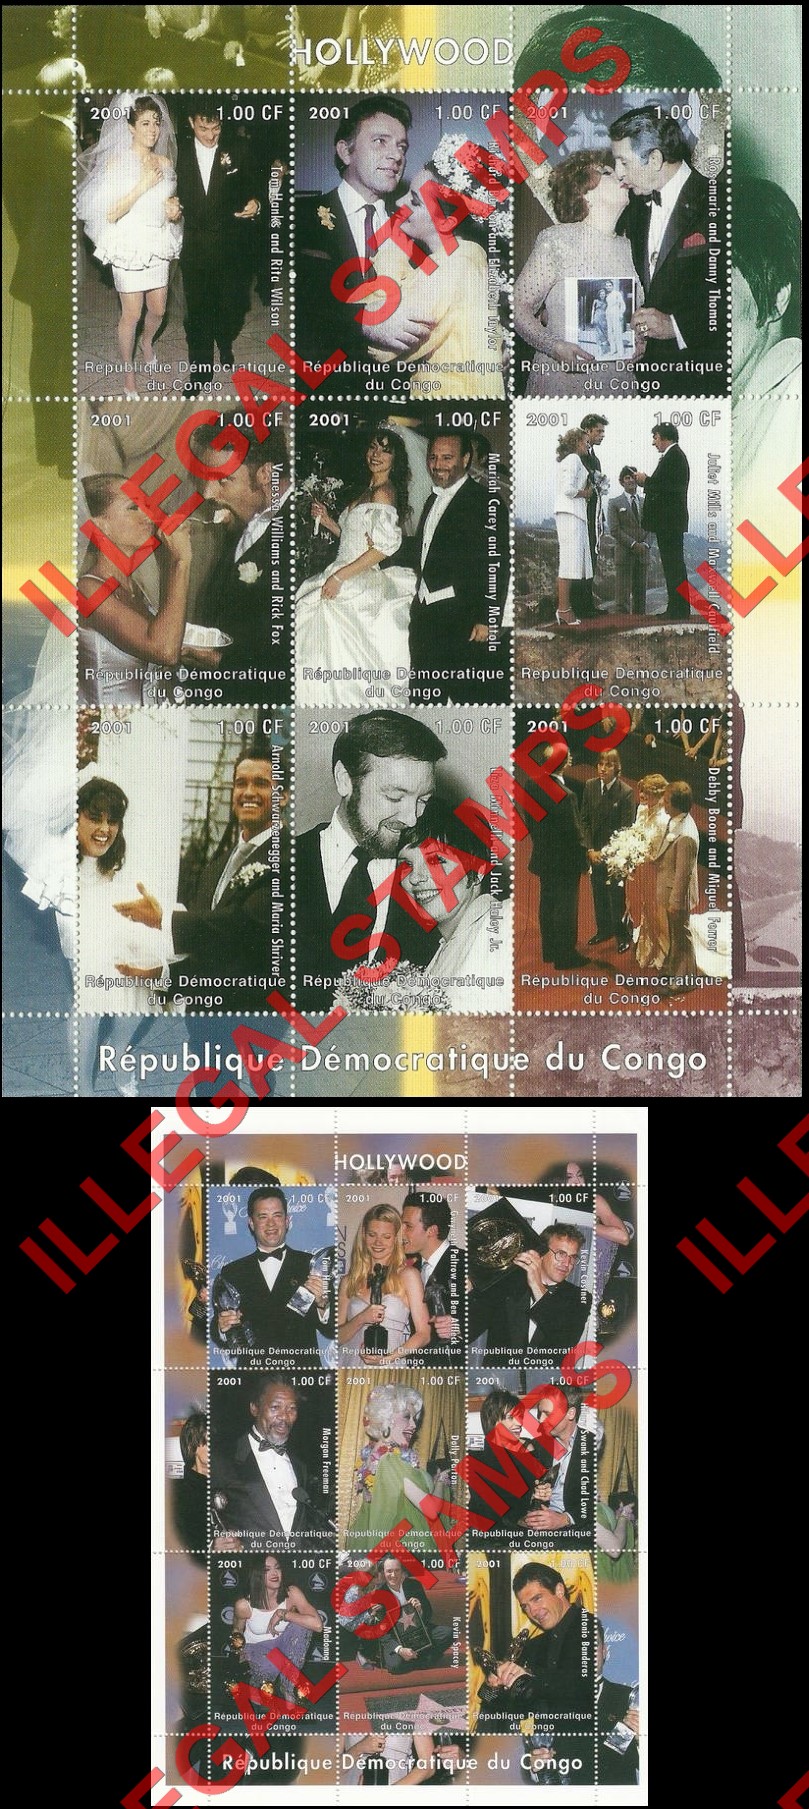 Congo Democratic Republic 2001 Hollywood Illegal Stamp Sheets of 9 (Part 1)